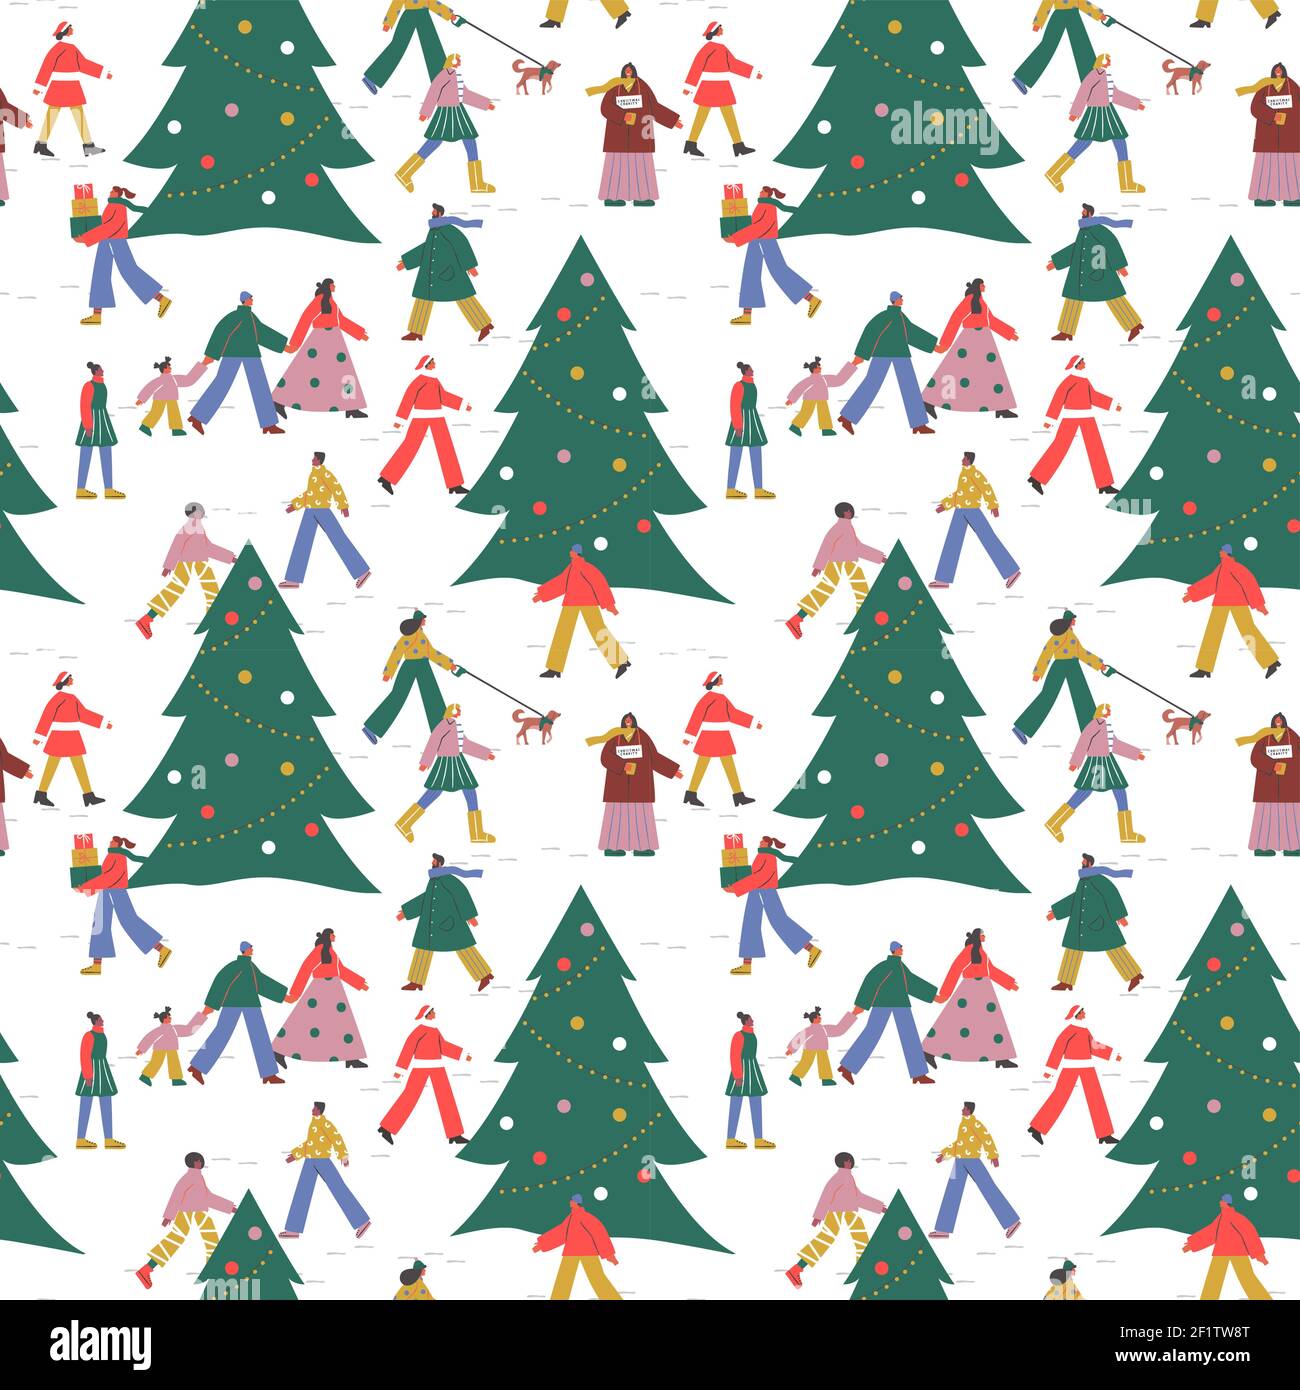 Christmas seamless pattern illustration, diverse people walking in winter snow landscape with xmas pine tree. Social holiday background includes chari Stock Vector